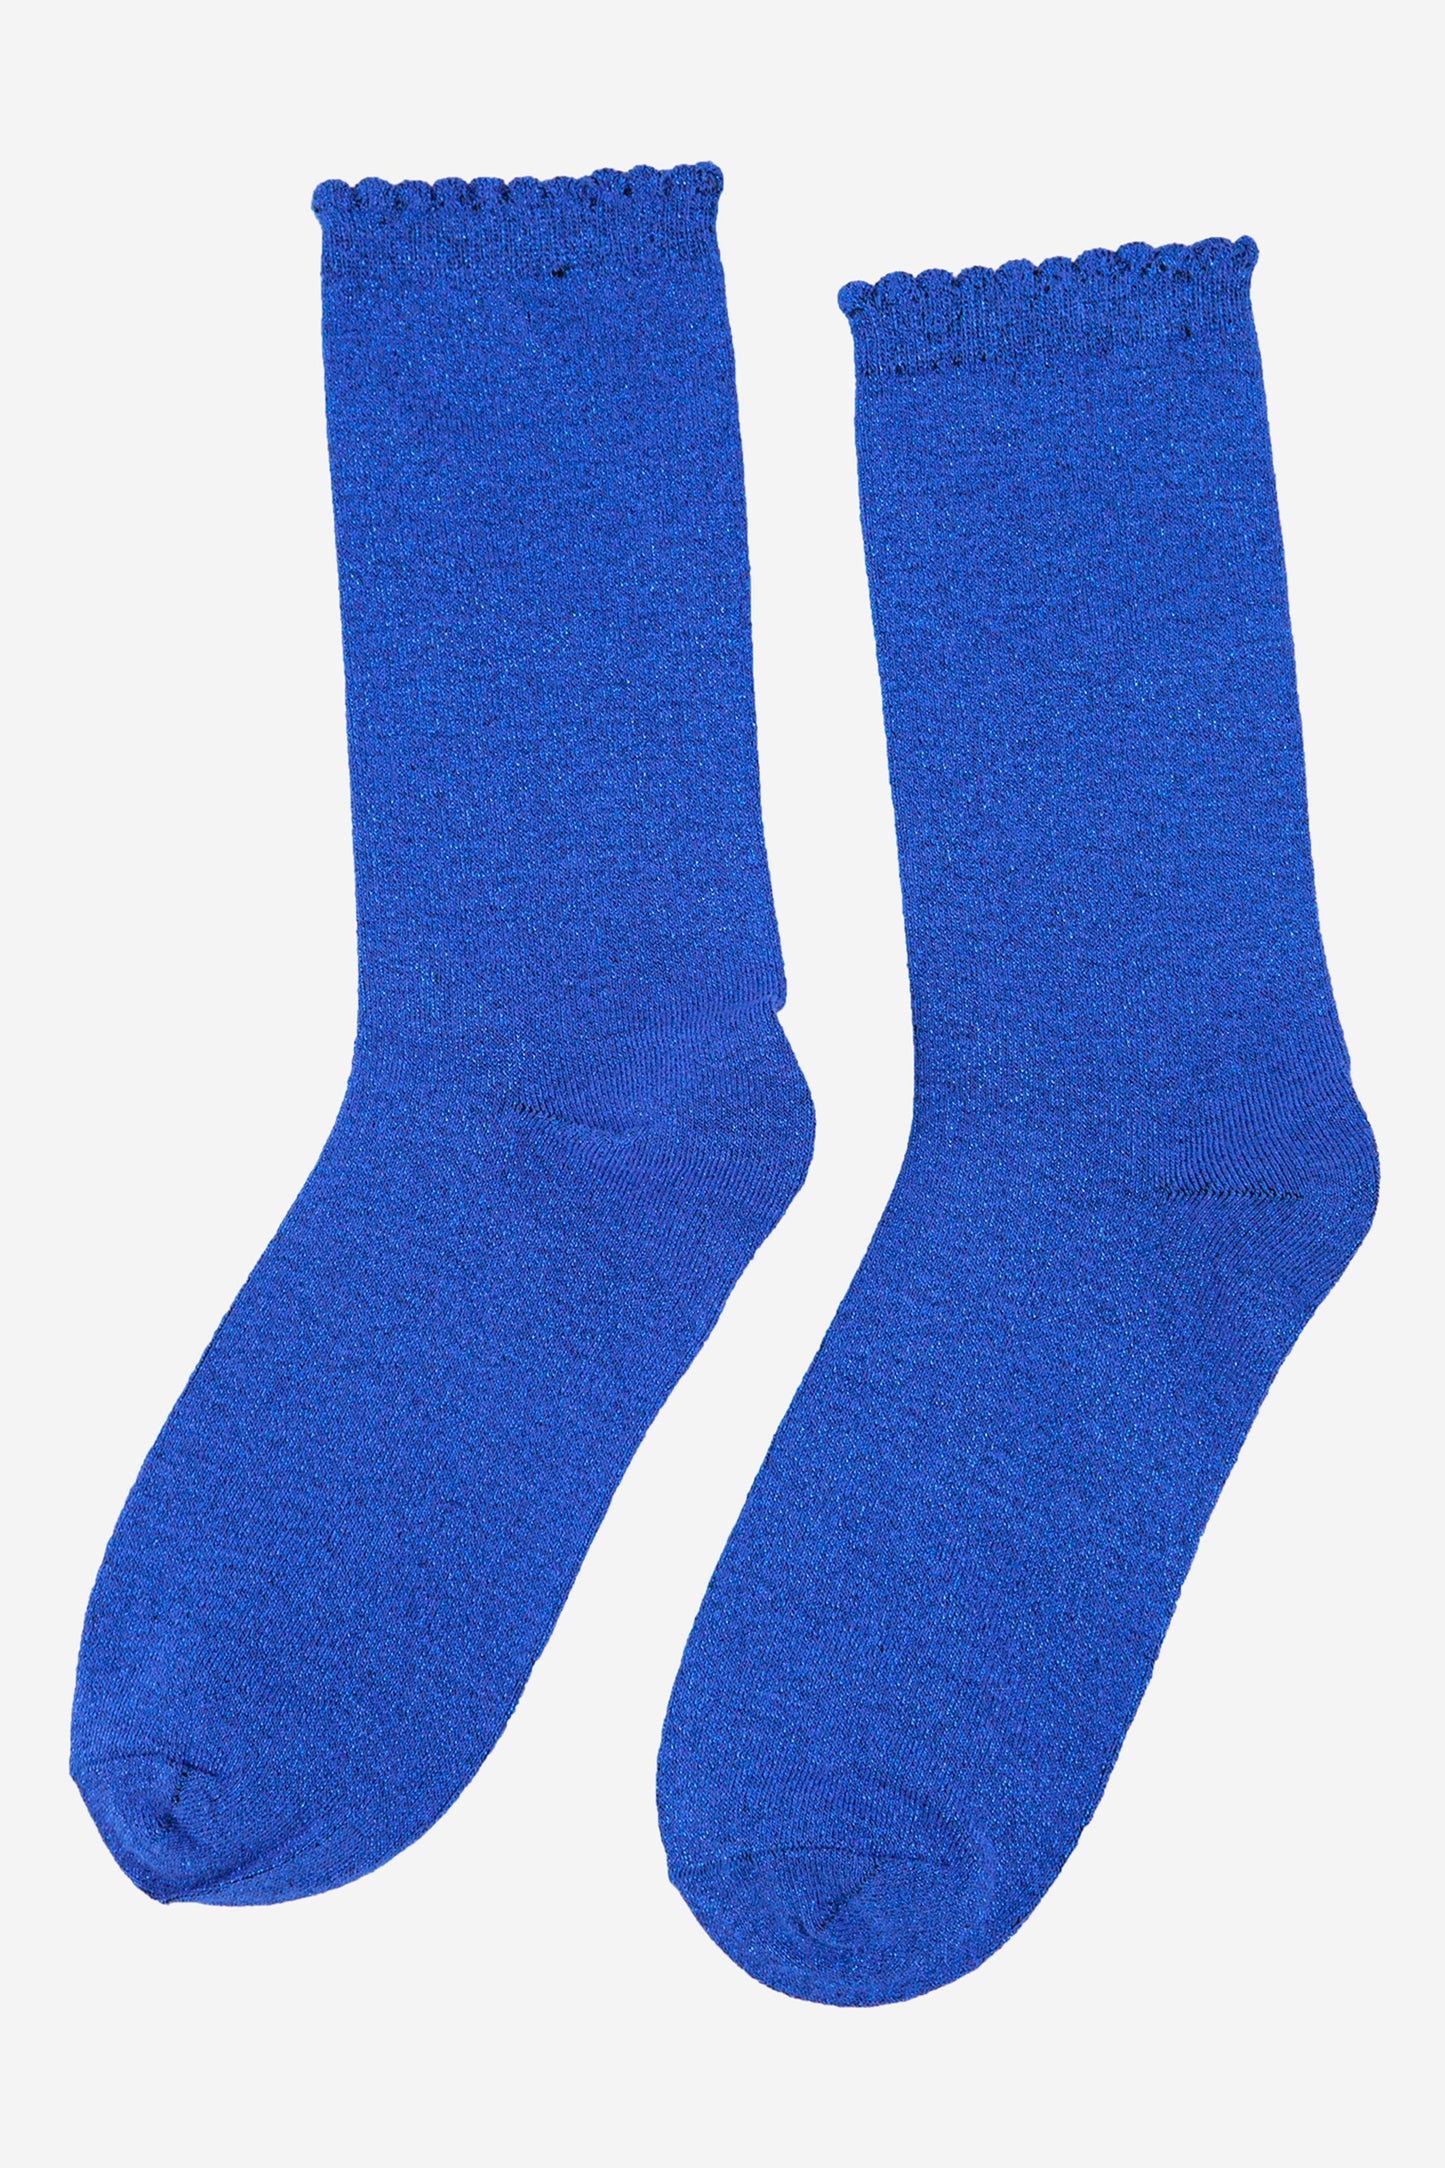 blue sparkly glitter socks with scalloped cuffs and an all over shimmer